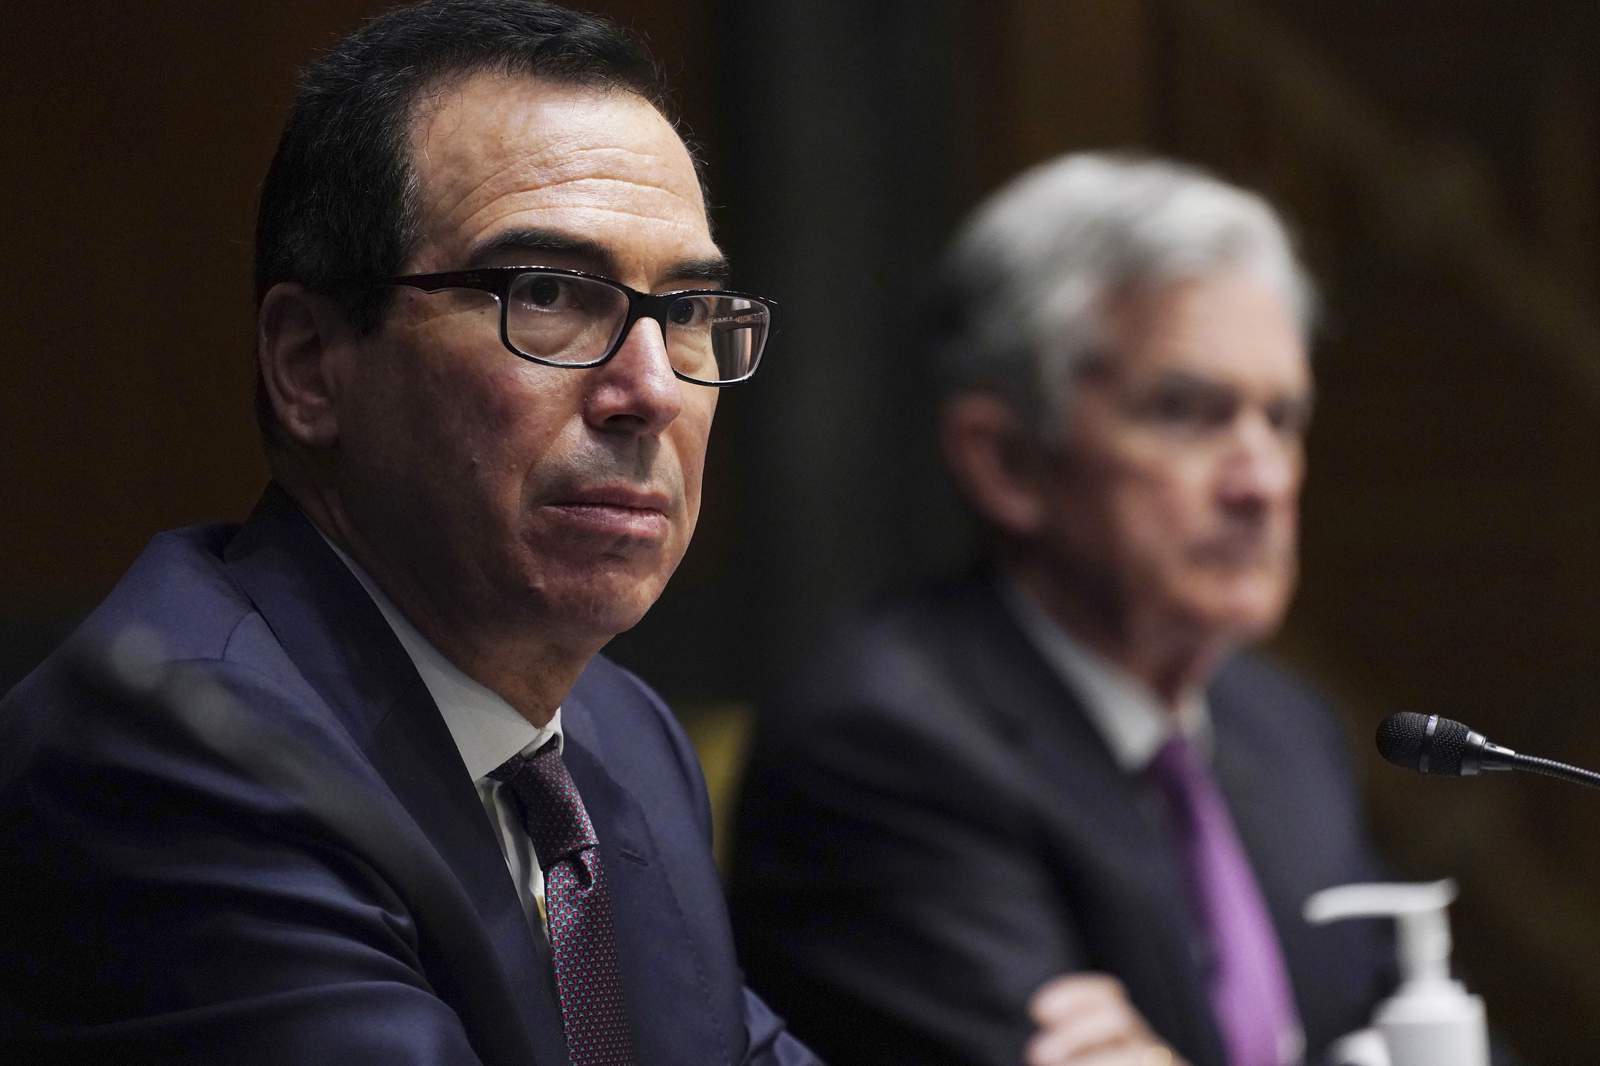 Mnuchin denies trying to hinder incoming administration